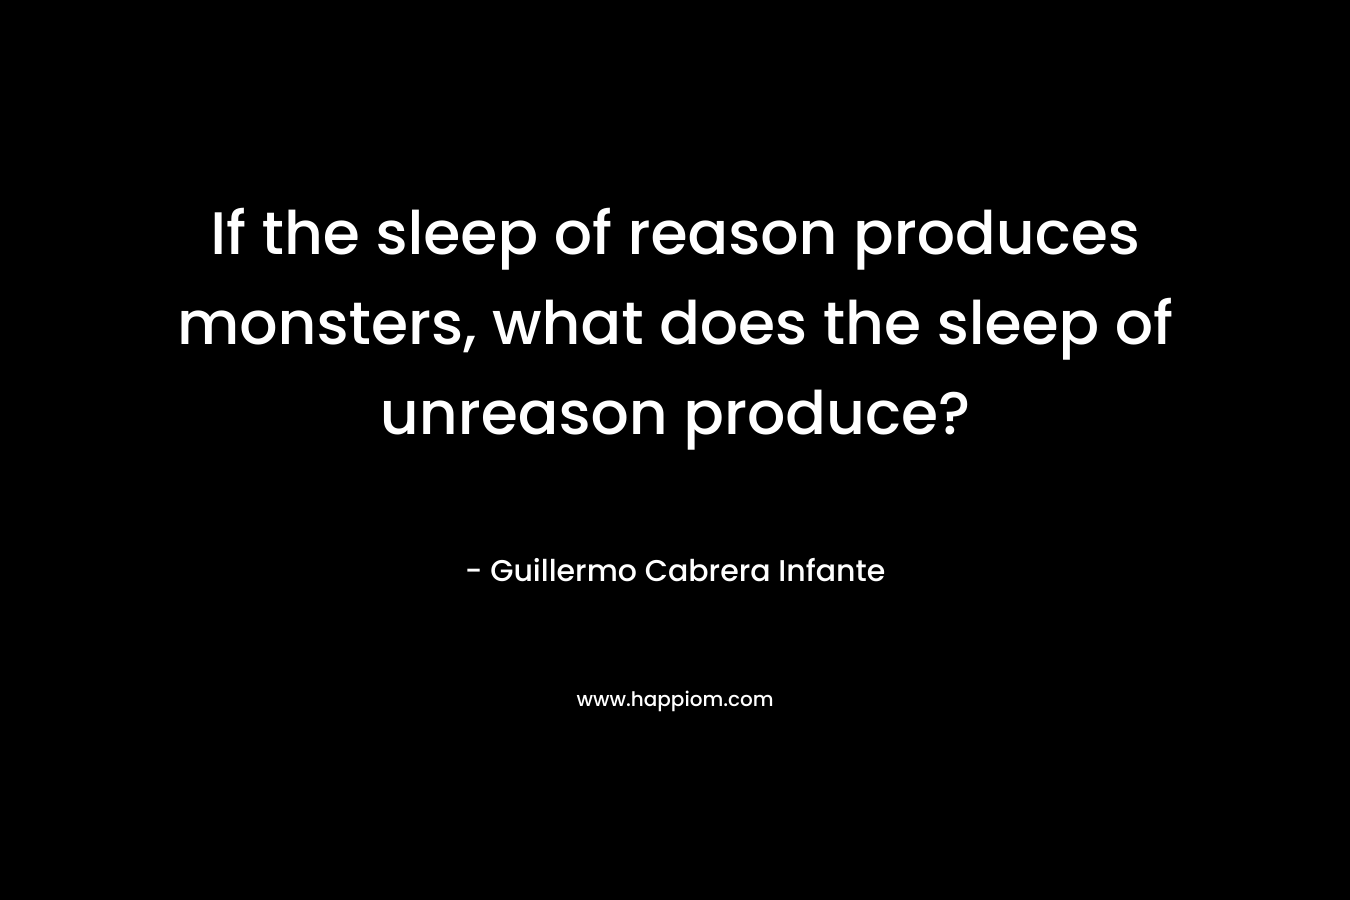 If the sleep of reason produces monsters, what does the sleep of unreason produce? – Guillermo Cabrera Infante